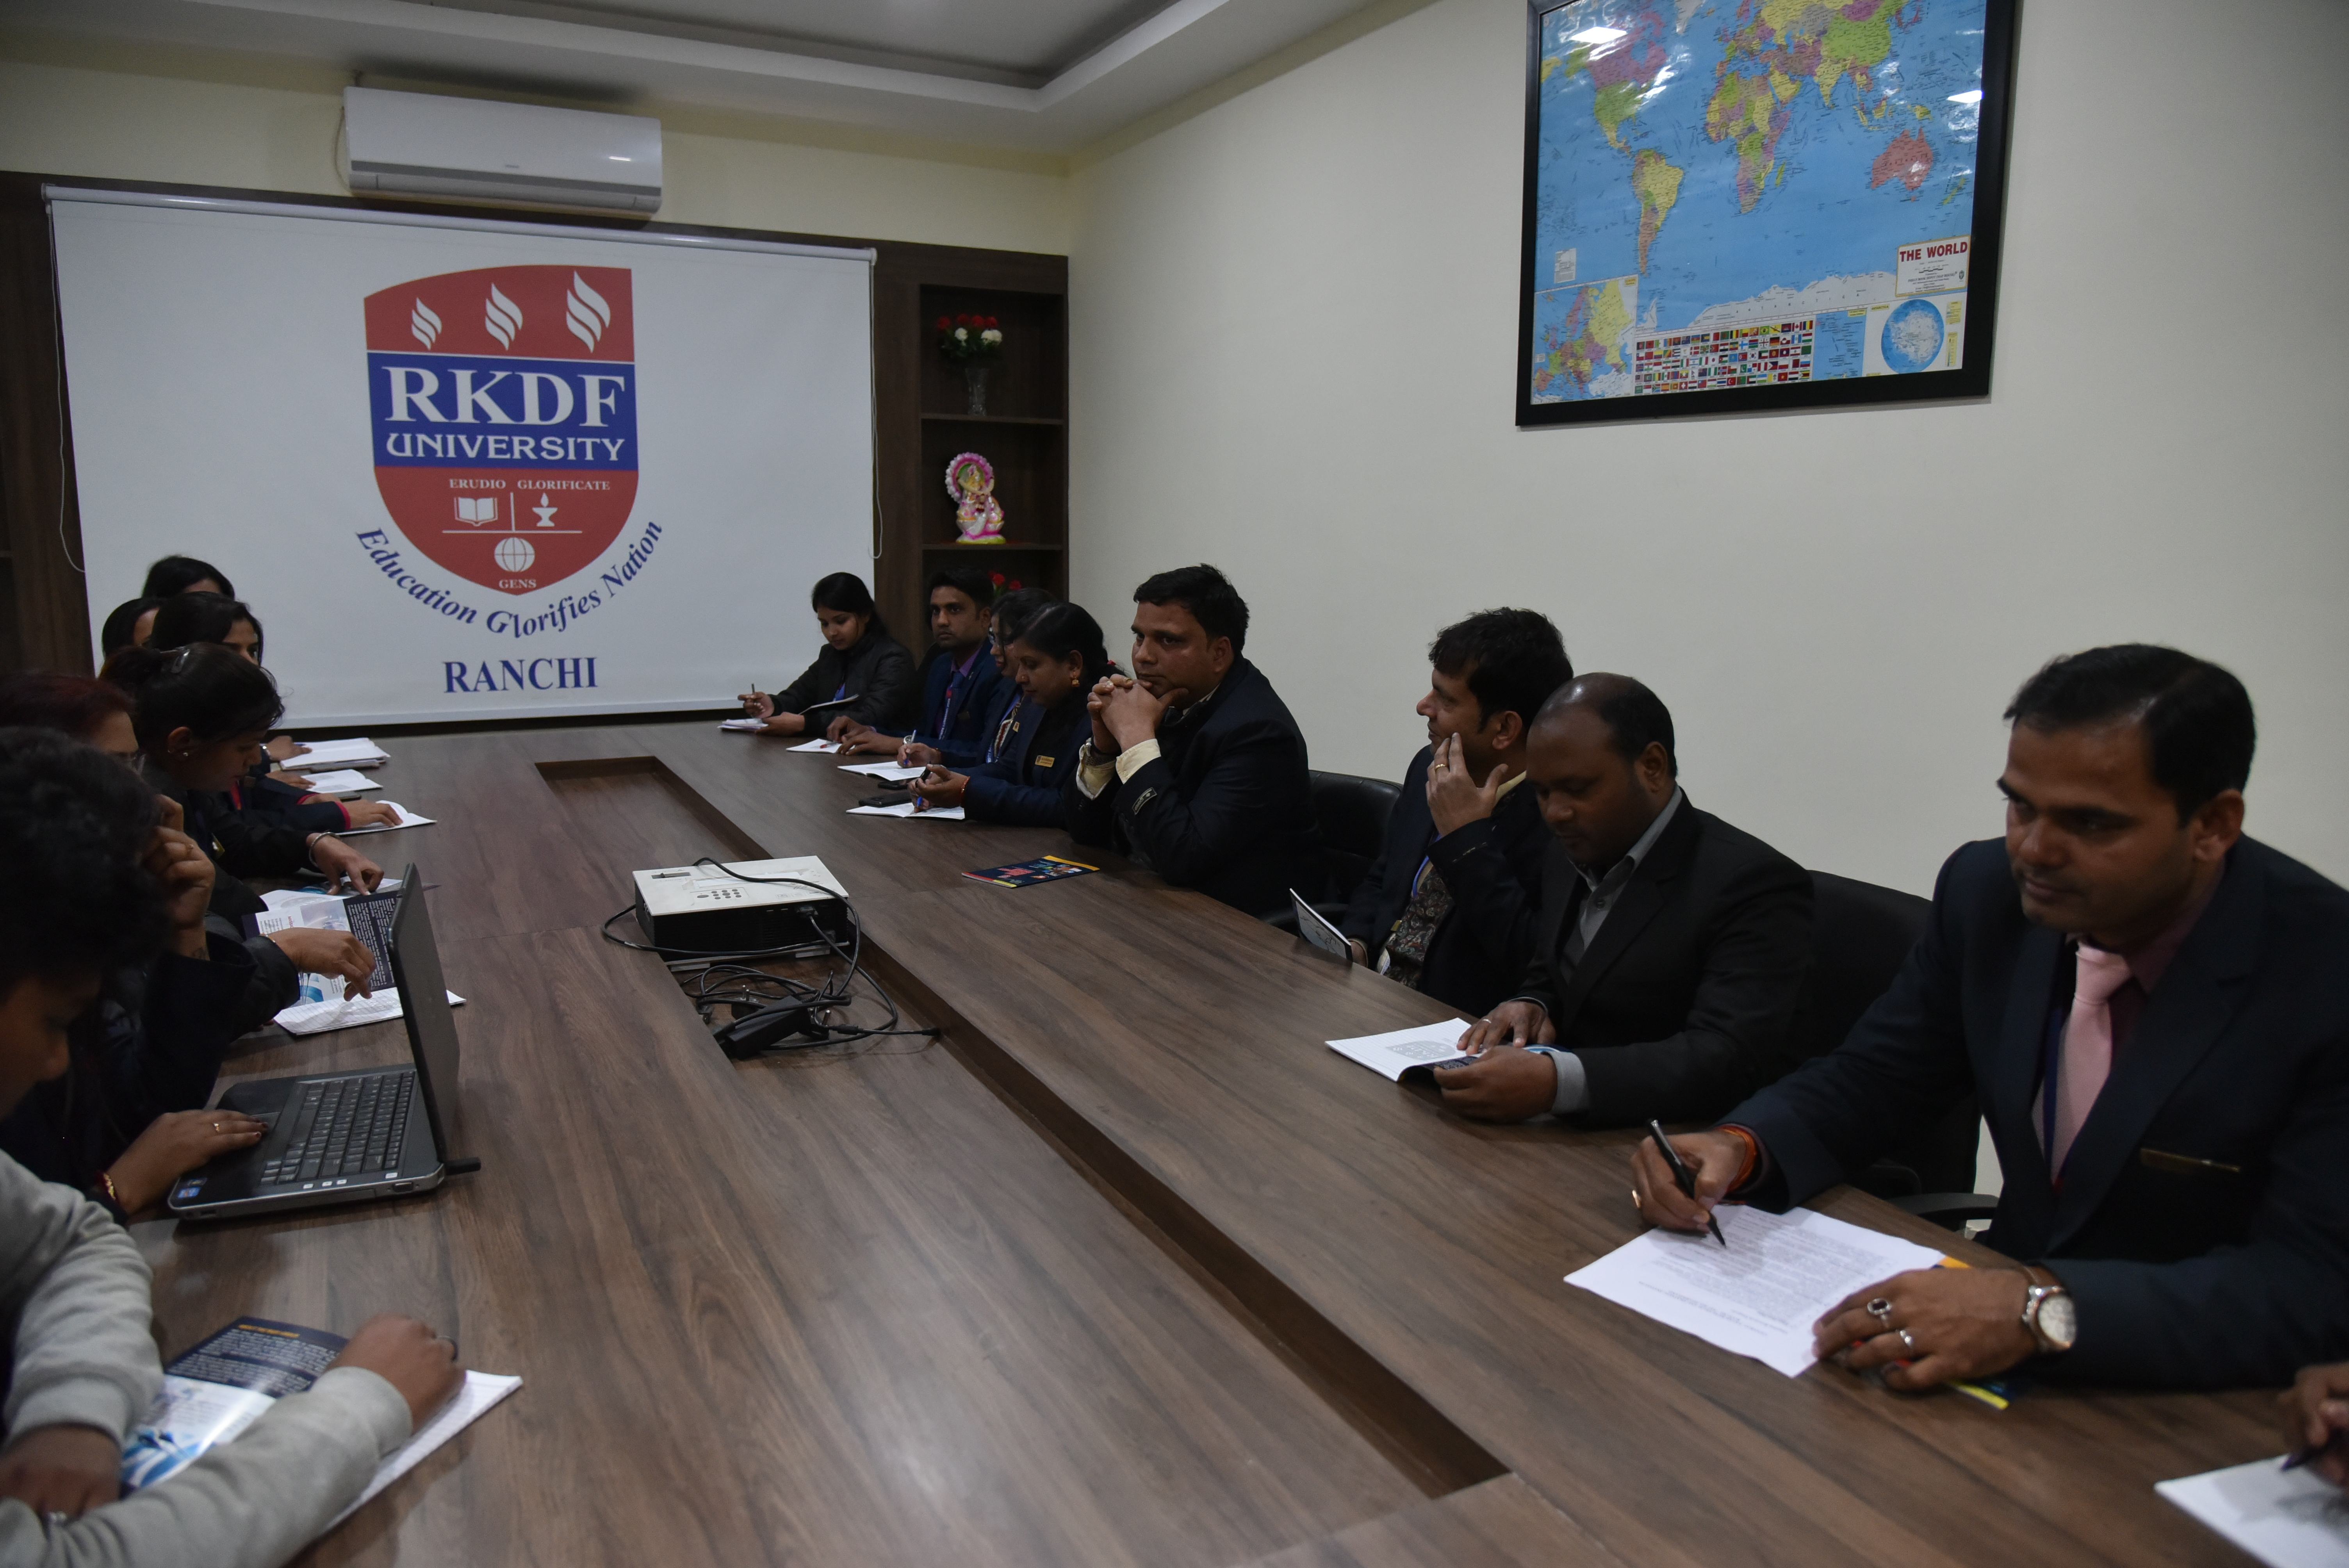 The RKDF University Conference Hall